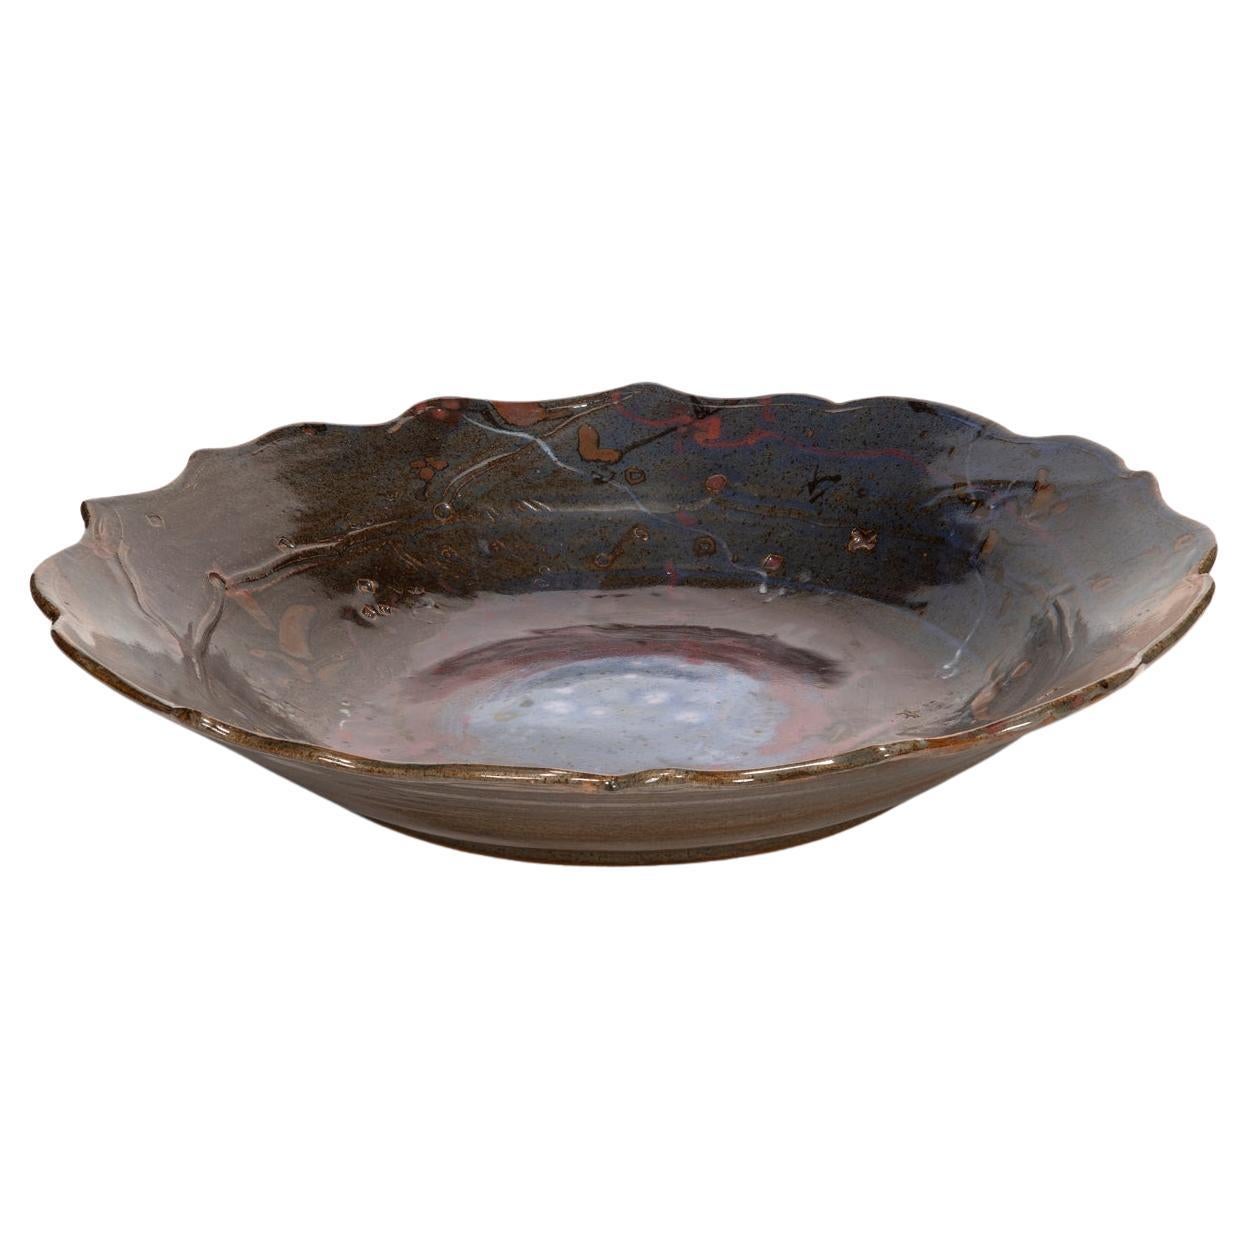 The ceramic charger with scalloped edge is an example of the kind of work by which John Glick became so famous. He was seduced by the effects of the reduction kiln, which decreased the levels of oxygen during firing, inducing the flame to pull